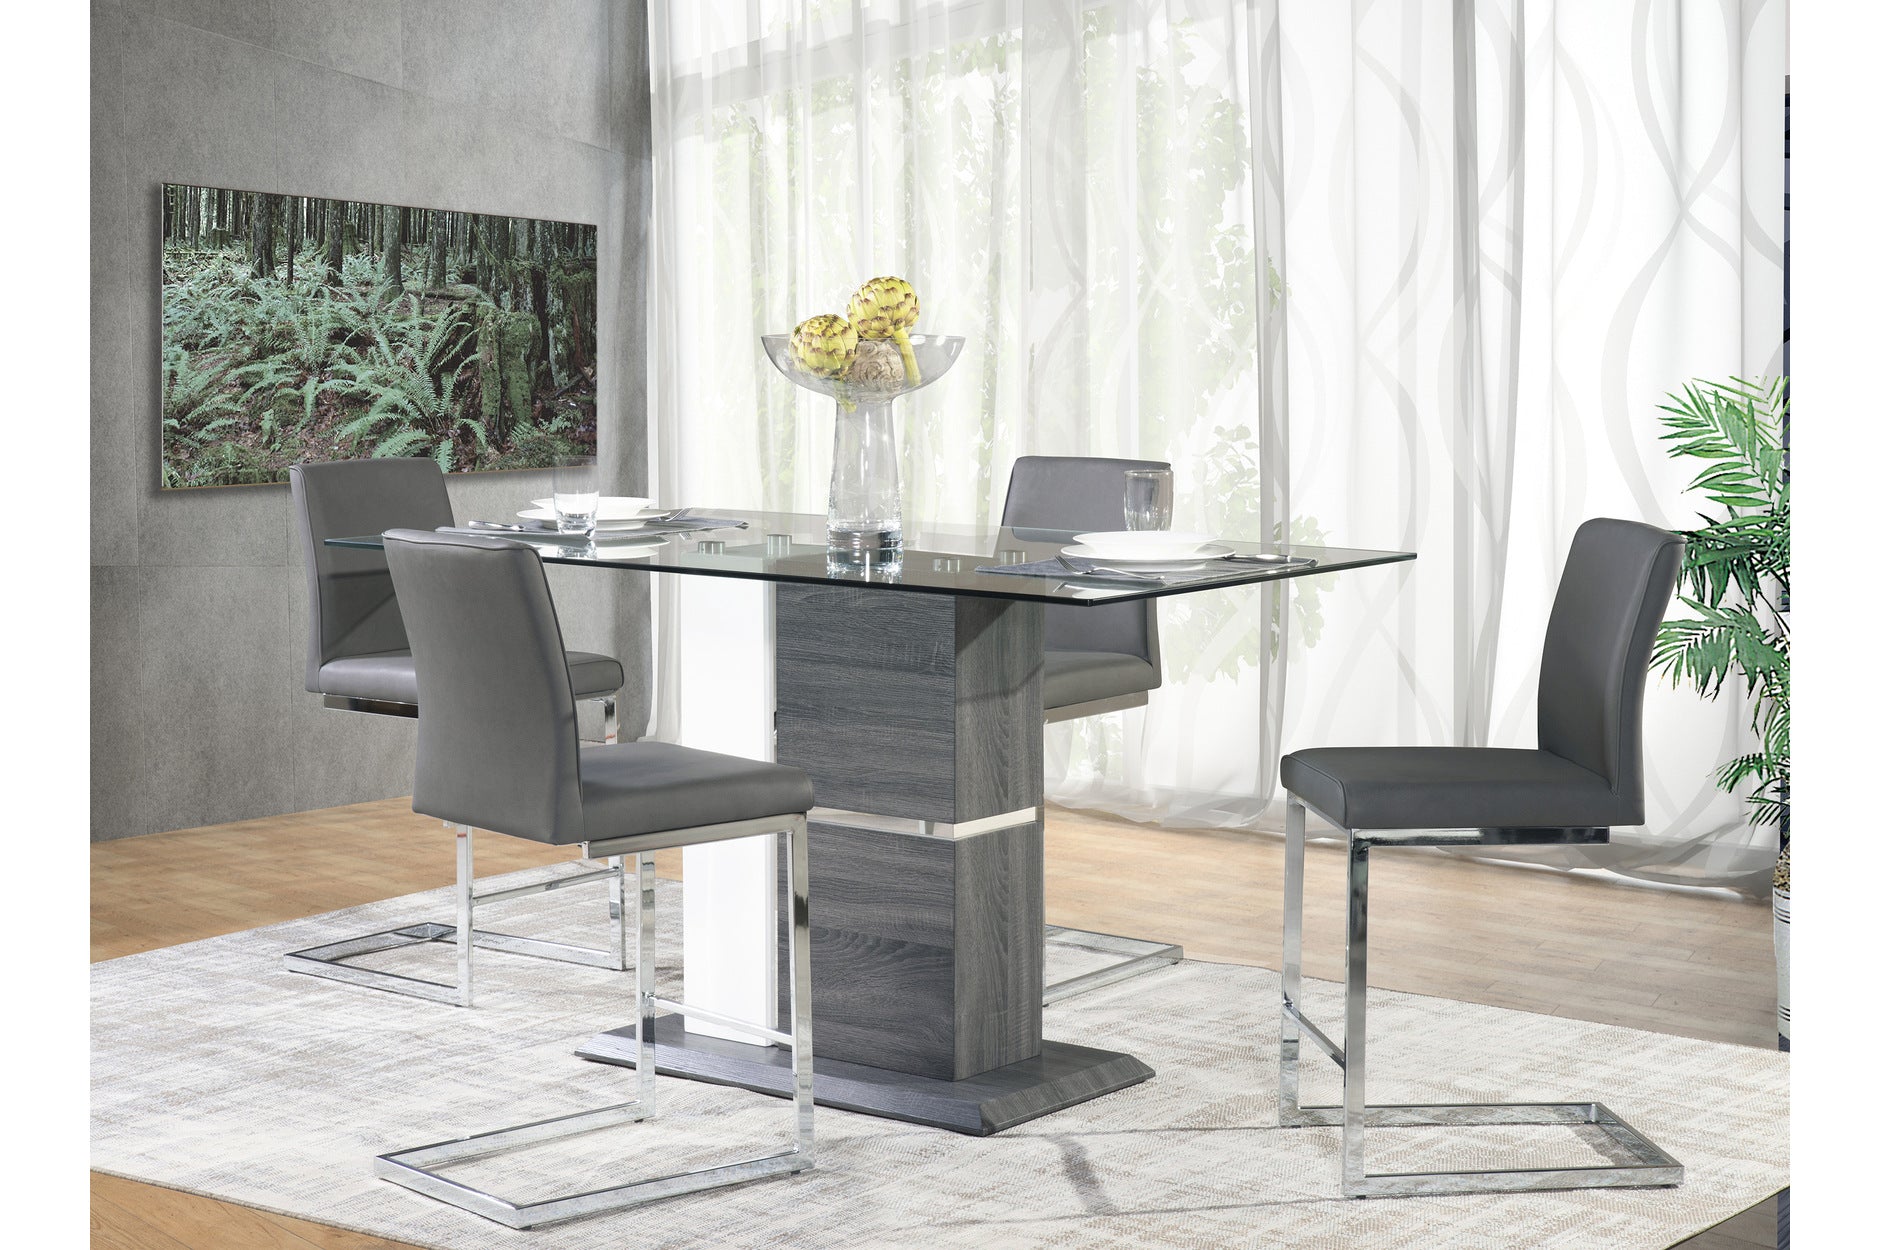 Shirelle Dining Collection Grey 6826 -36